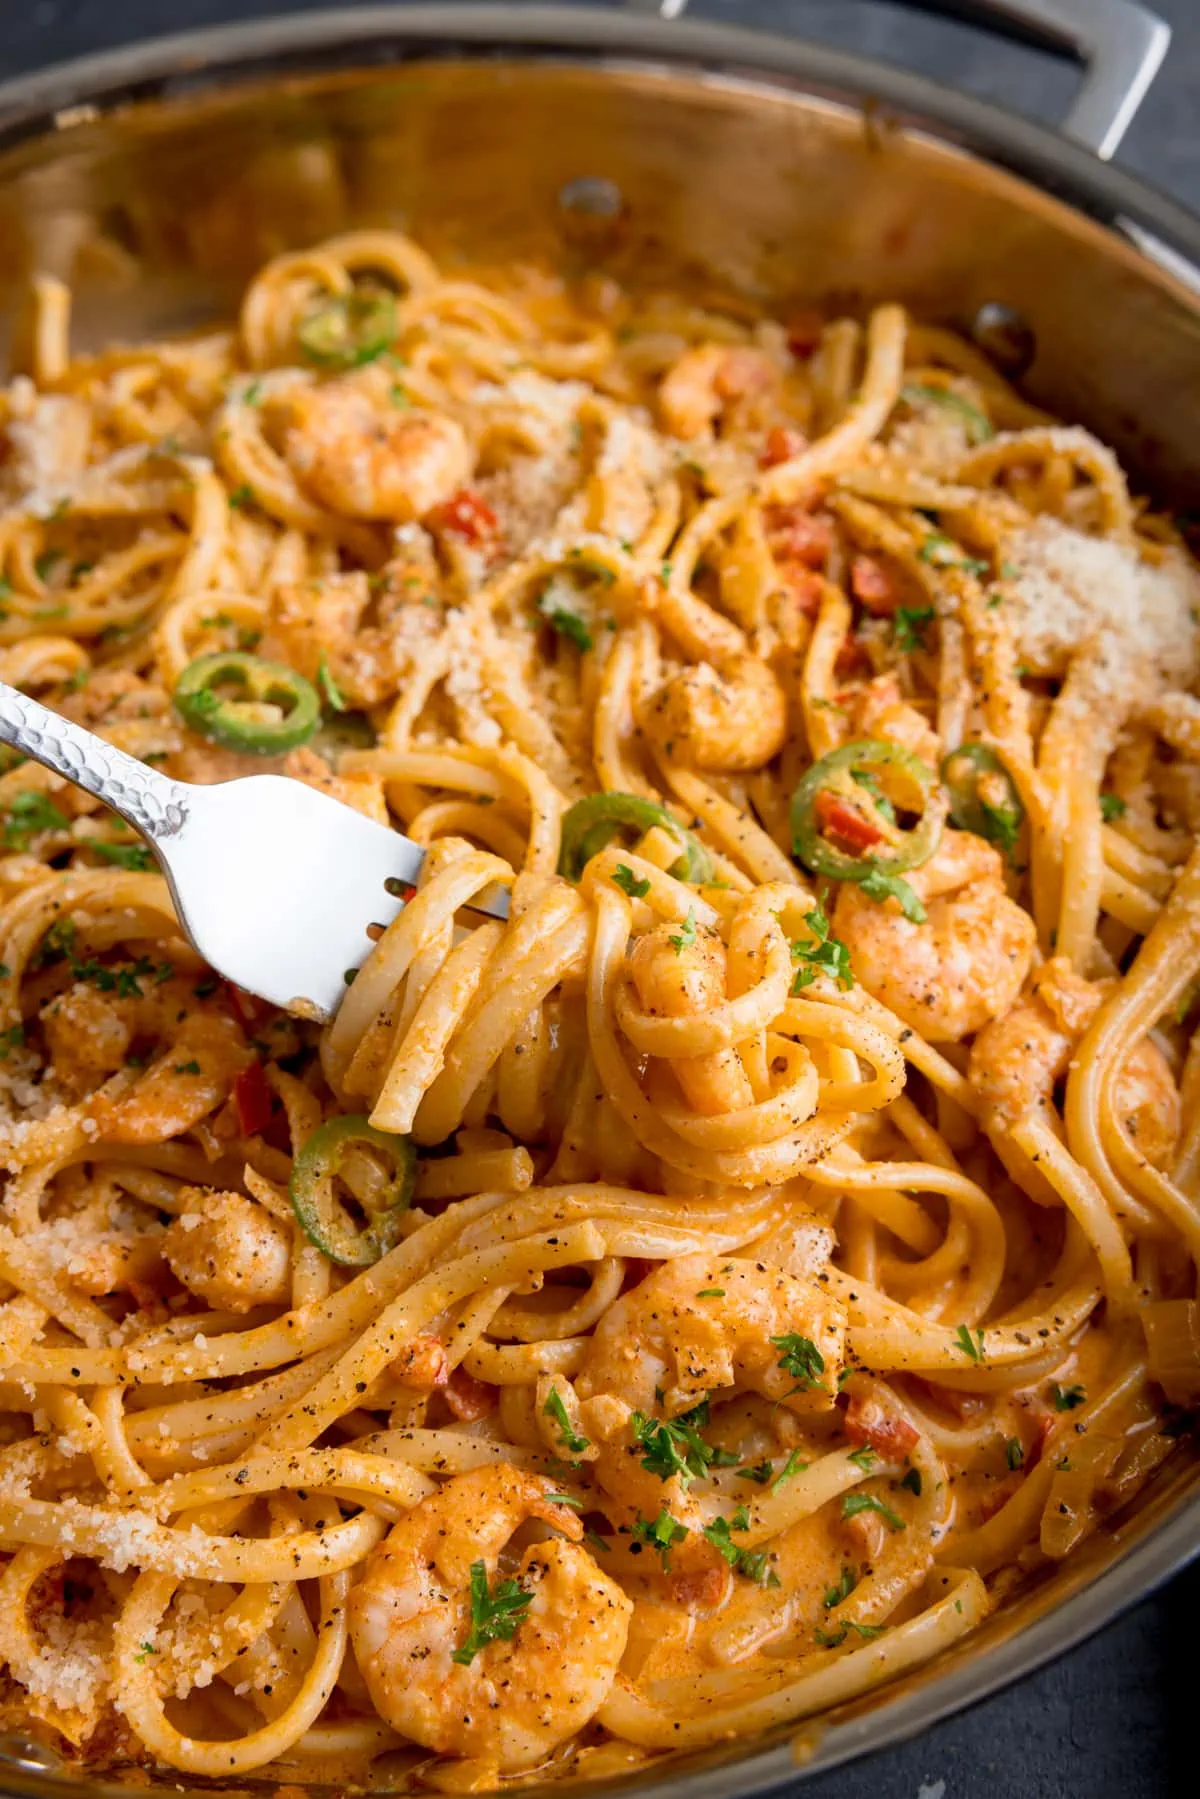 Tall image of a pan of prawn linguine in a creamy buffalo sauce. There is a fork taking some of the pasta from the pan.